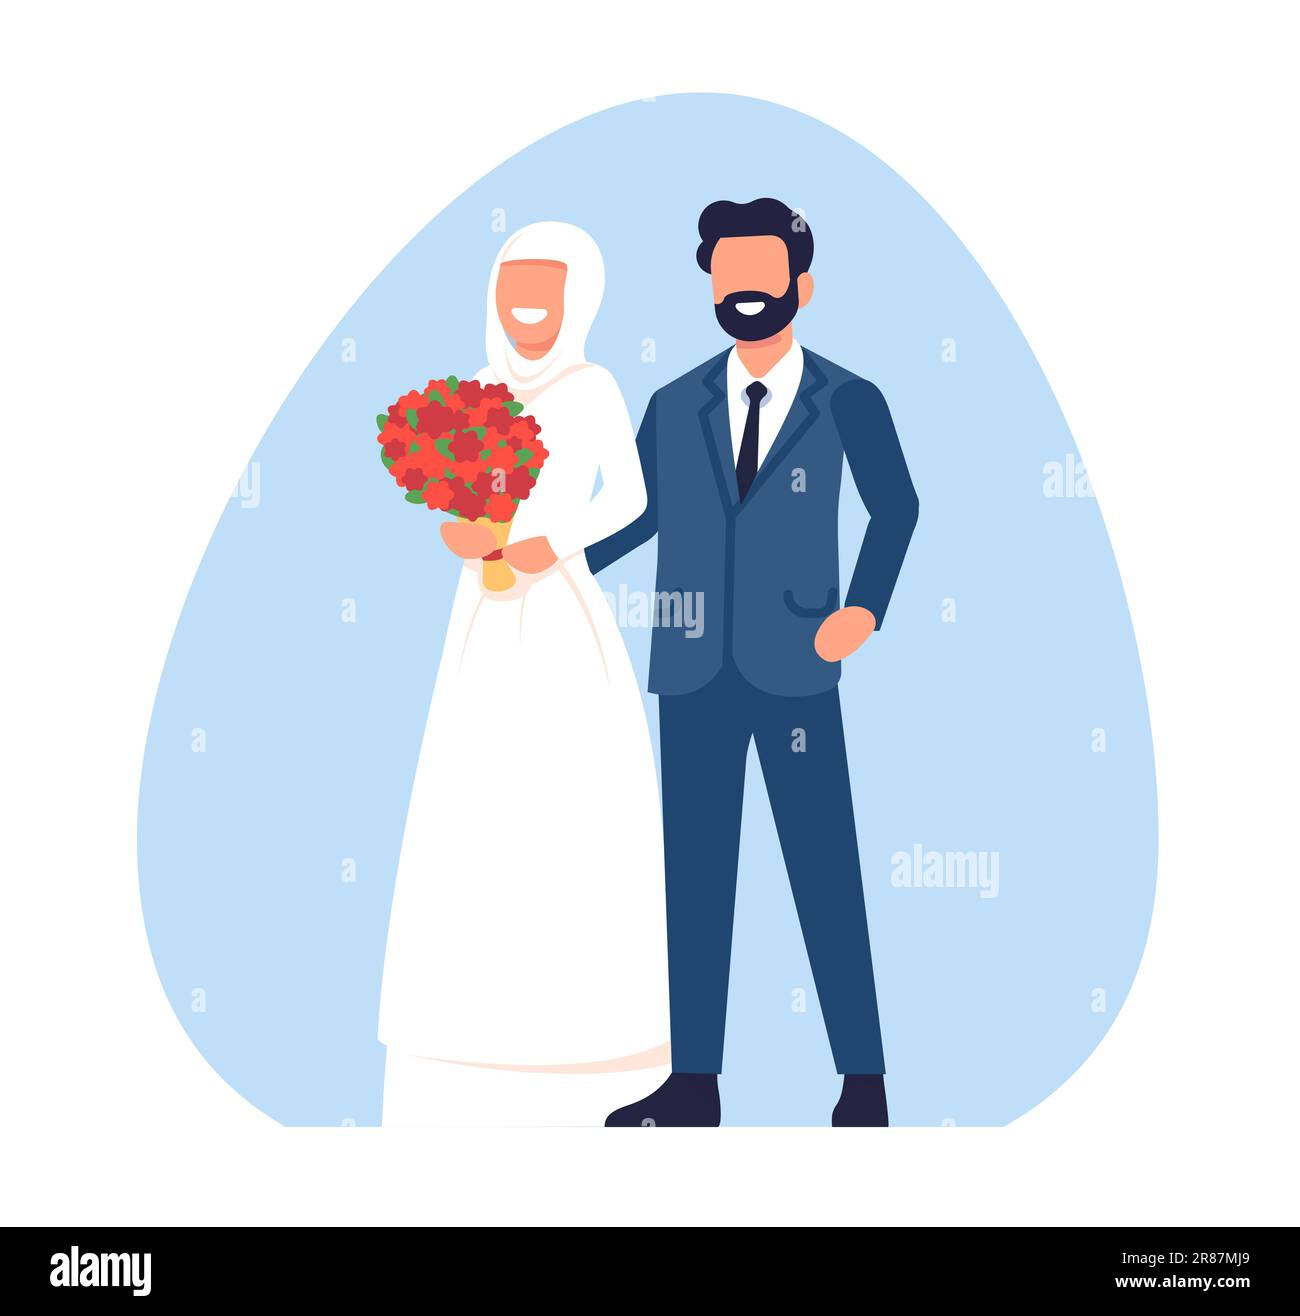 Muslim wedding couple. Happy bride and groom. Holiday dress and suit. Islamic marriage celebration. Arabic newlyweds. Wife and husband portrait. Flowe Stock Vector